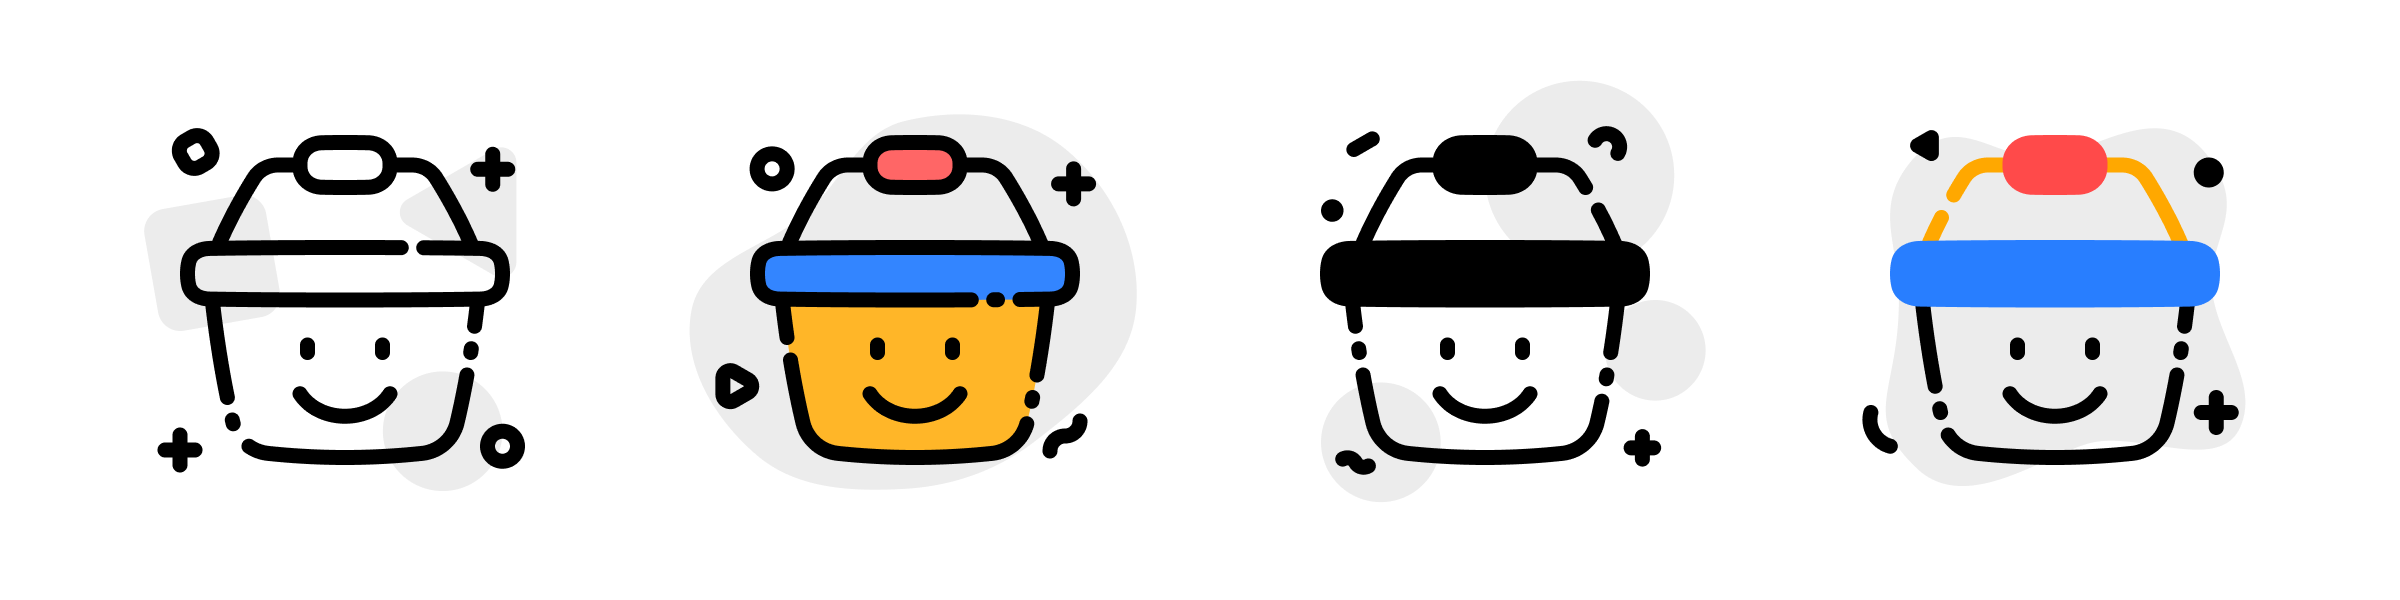 Simple steps to turn icons into mini illustrations